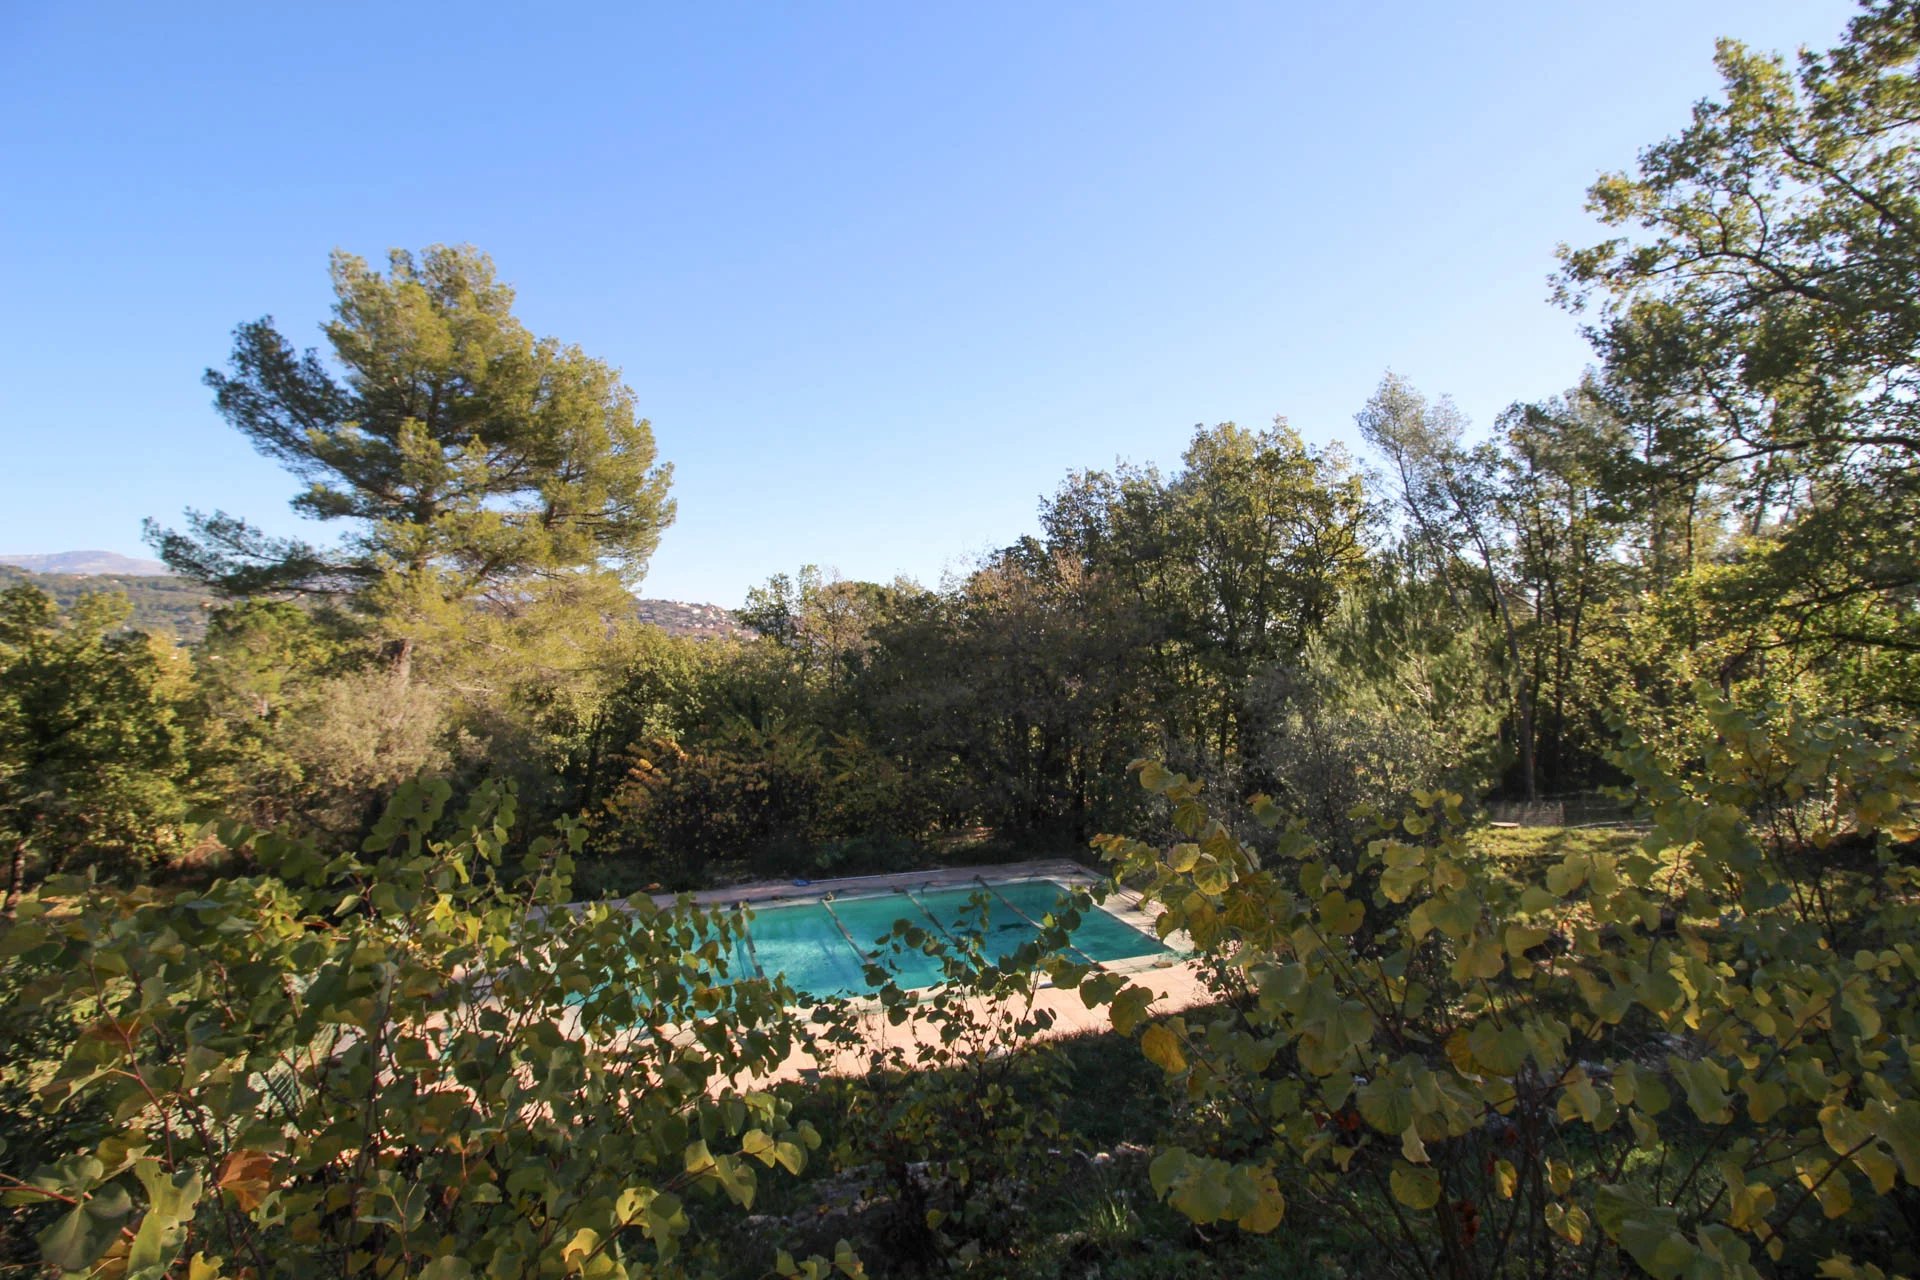 One-level villa in a quiet location with a beautiful view - Fayence